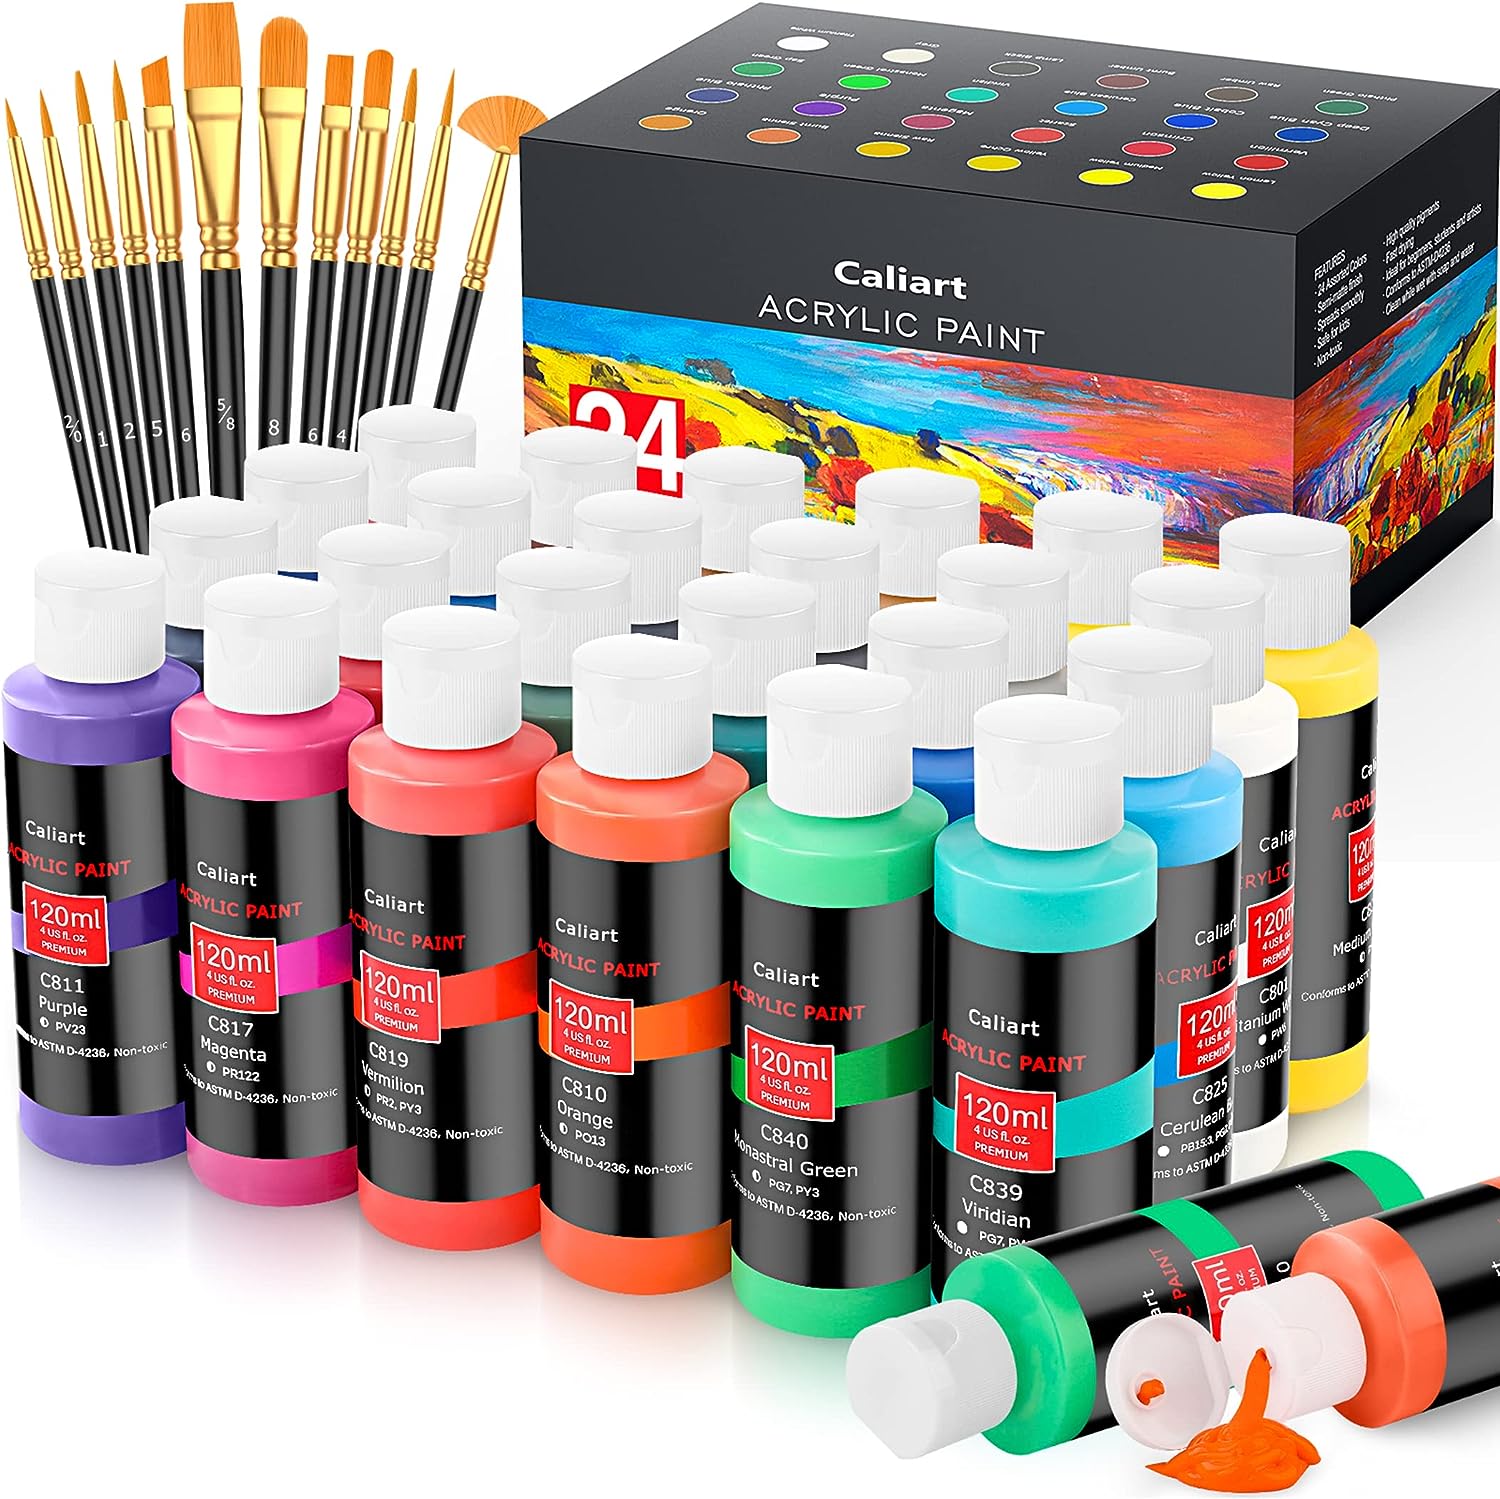 Caliart Acrylic Paint Set With 12 Brushes, 24 Colors [...]